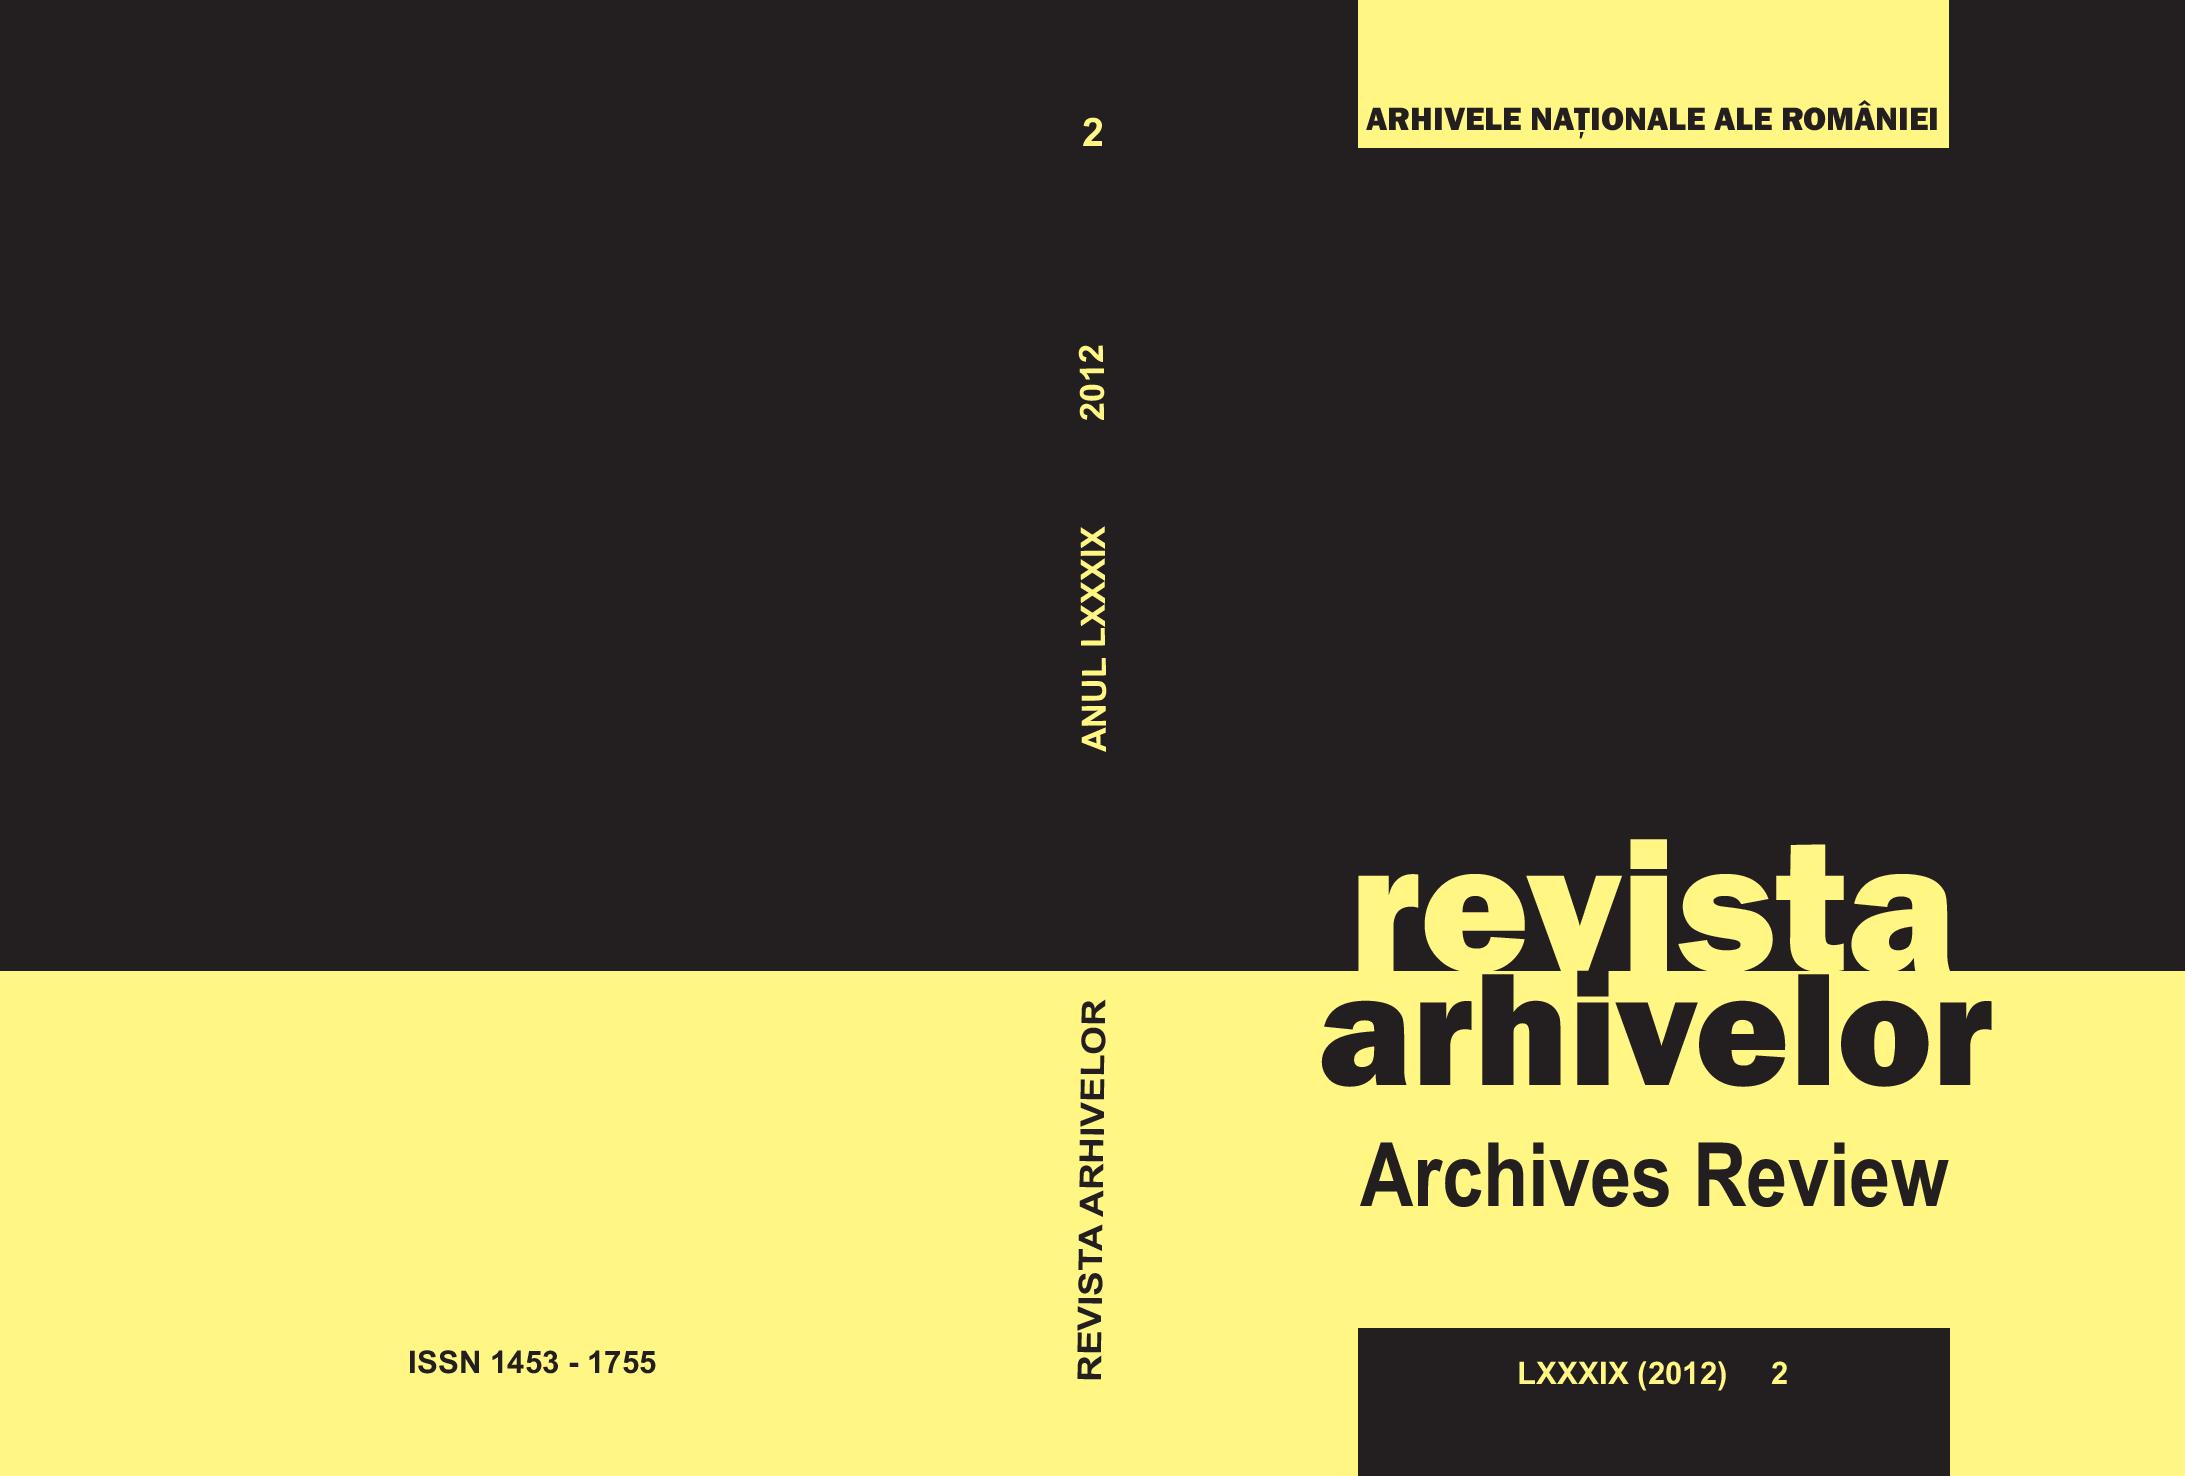 The National Archival Heritage and the General Inventory Cover Image